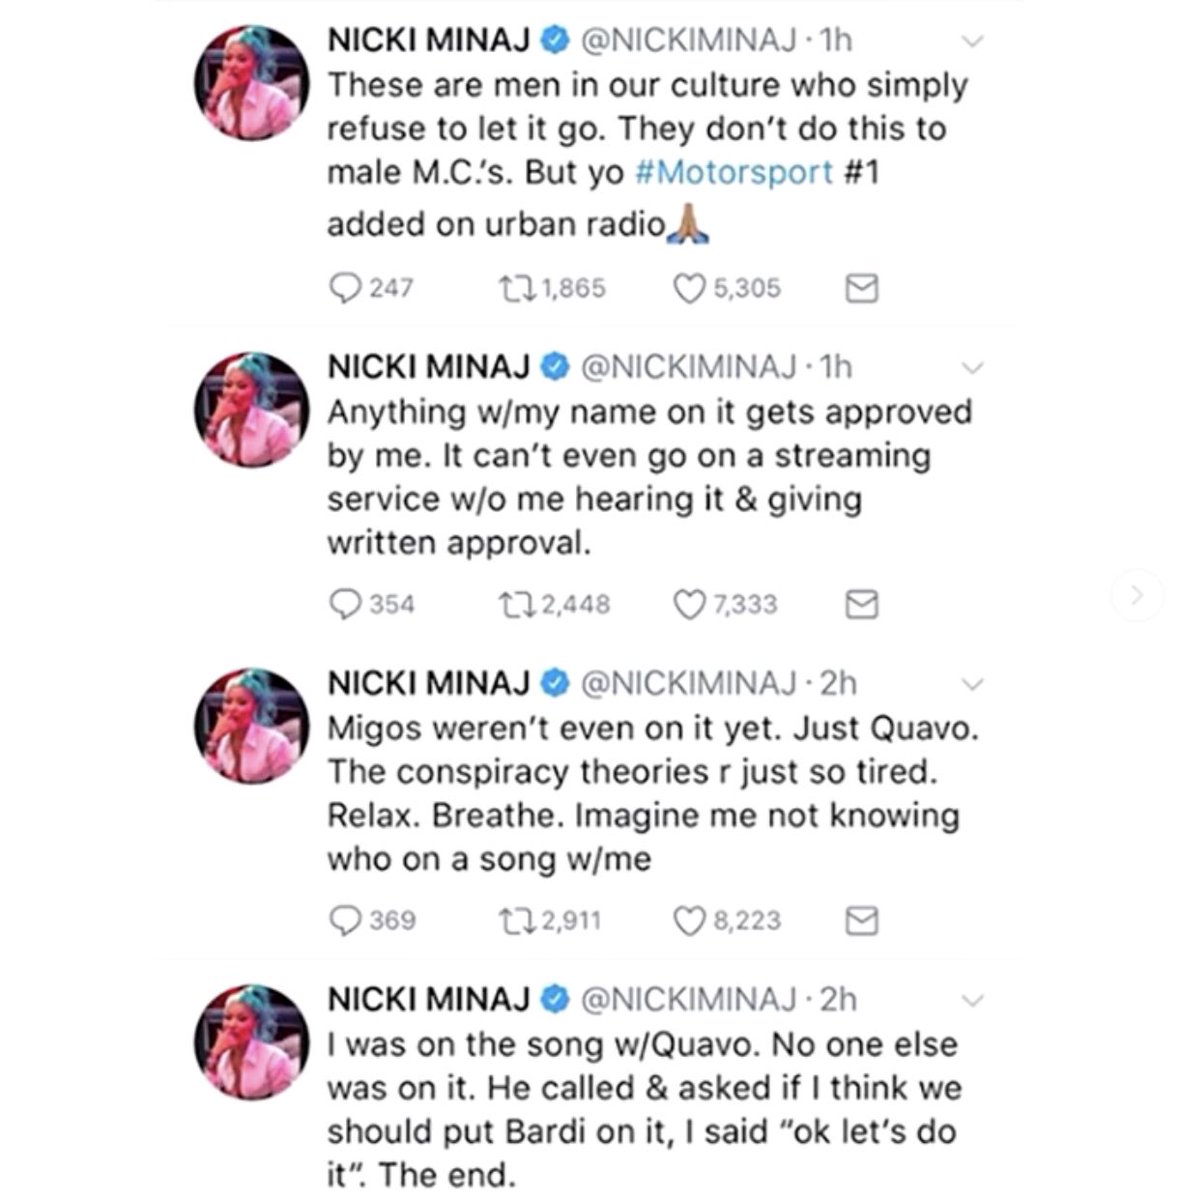 October 2017: Cardi B is asked about Nicki Minaj and if there is a beef. Cardi denies it. Nicki co-signs Cardi’s statement and goes into detail about how “Motorsport” came about.